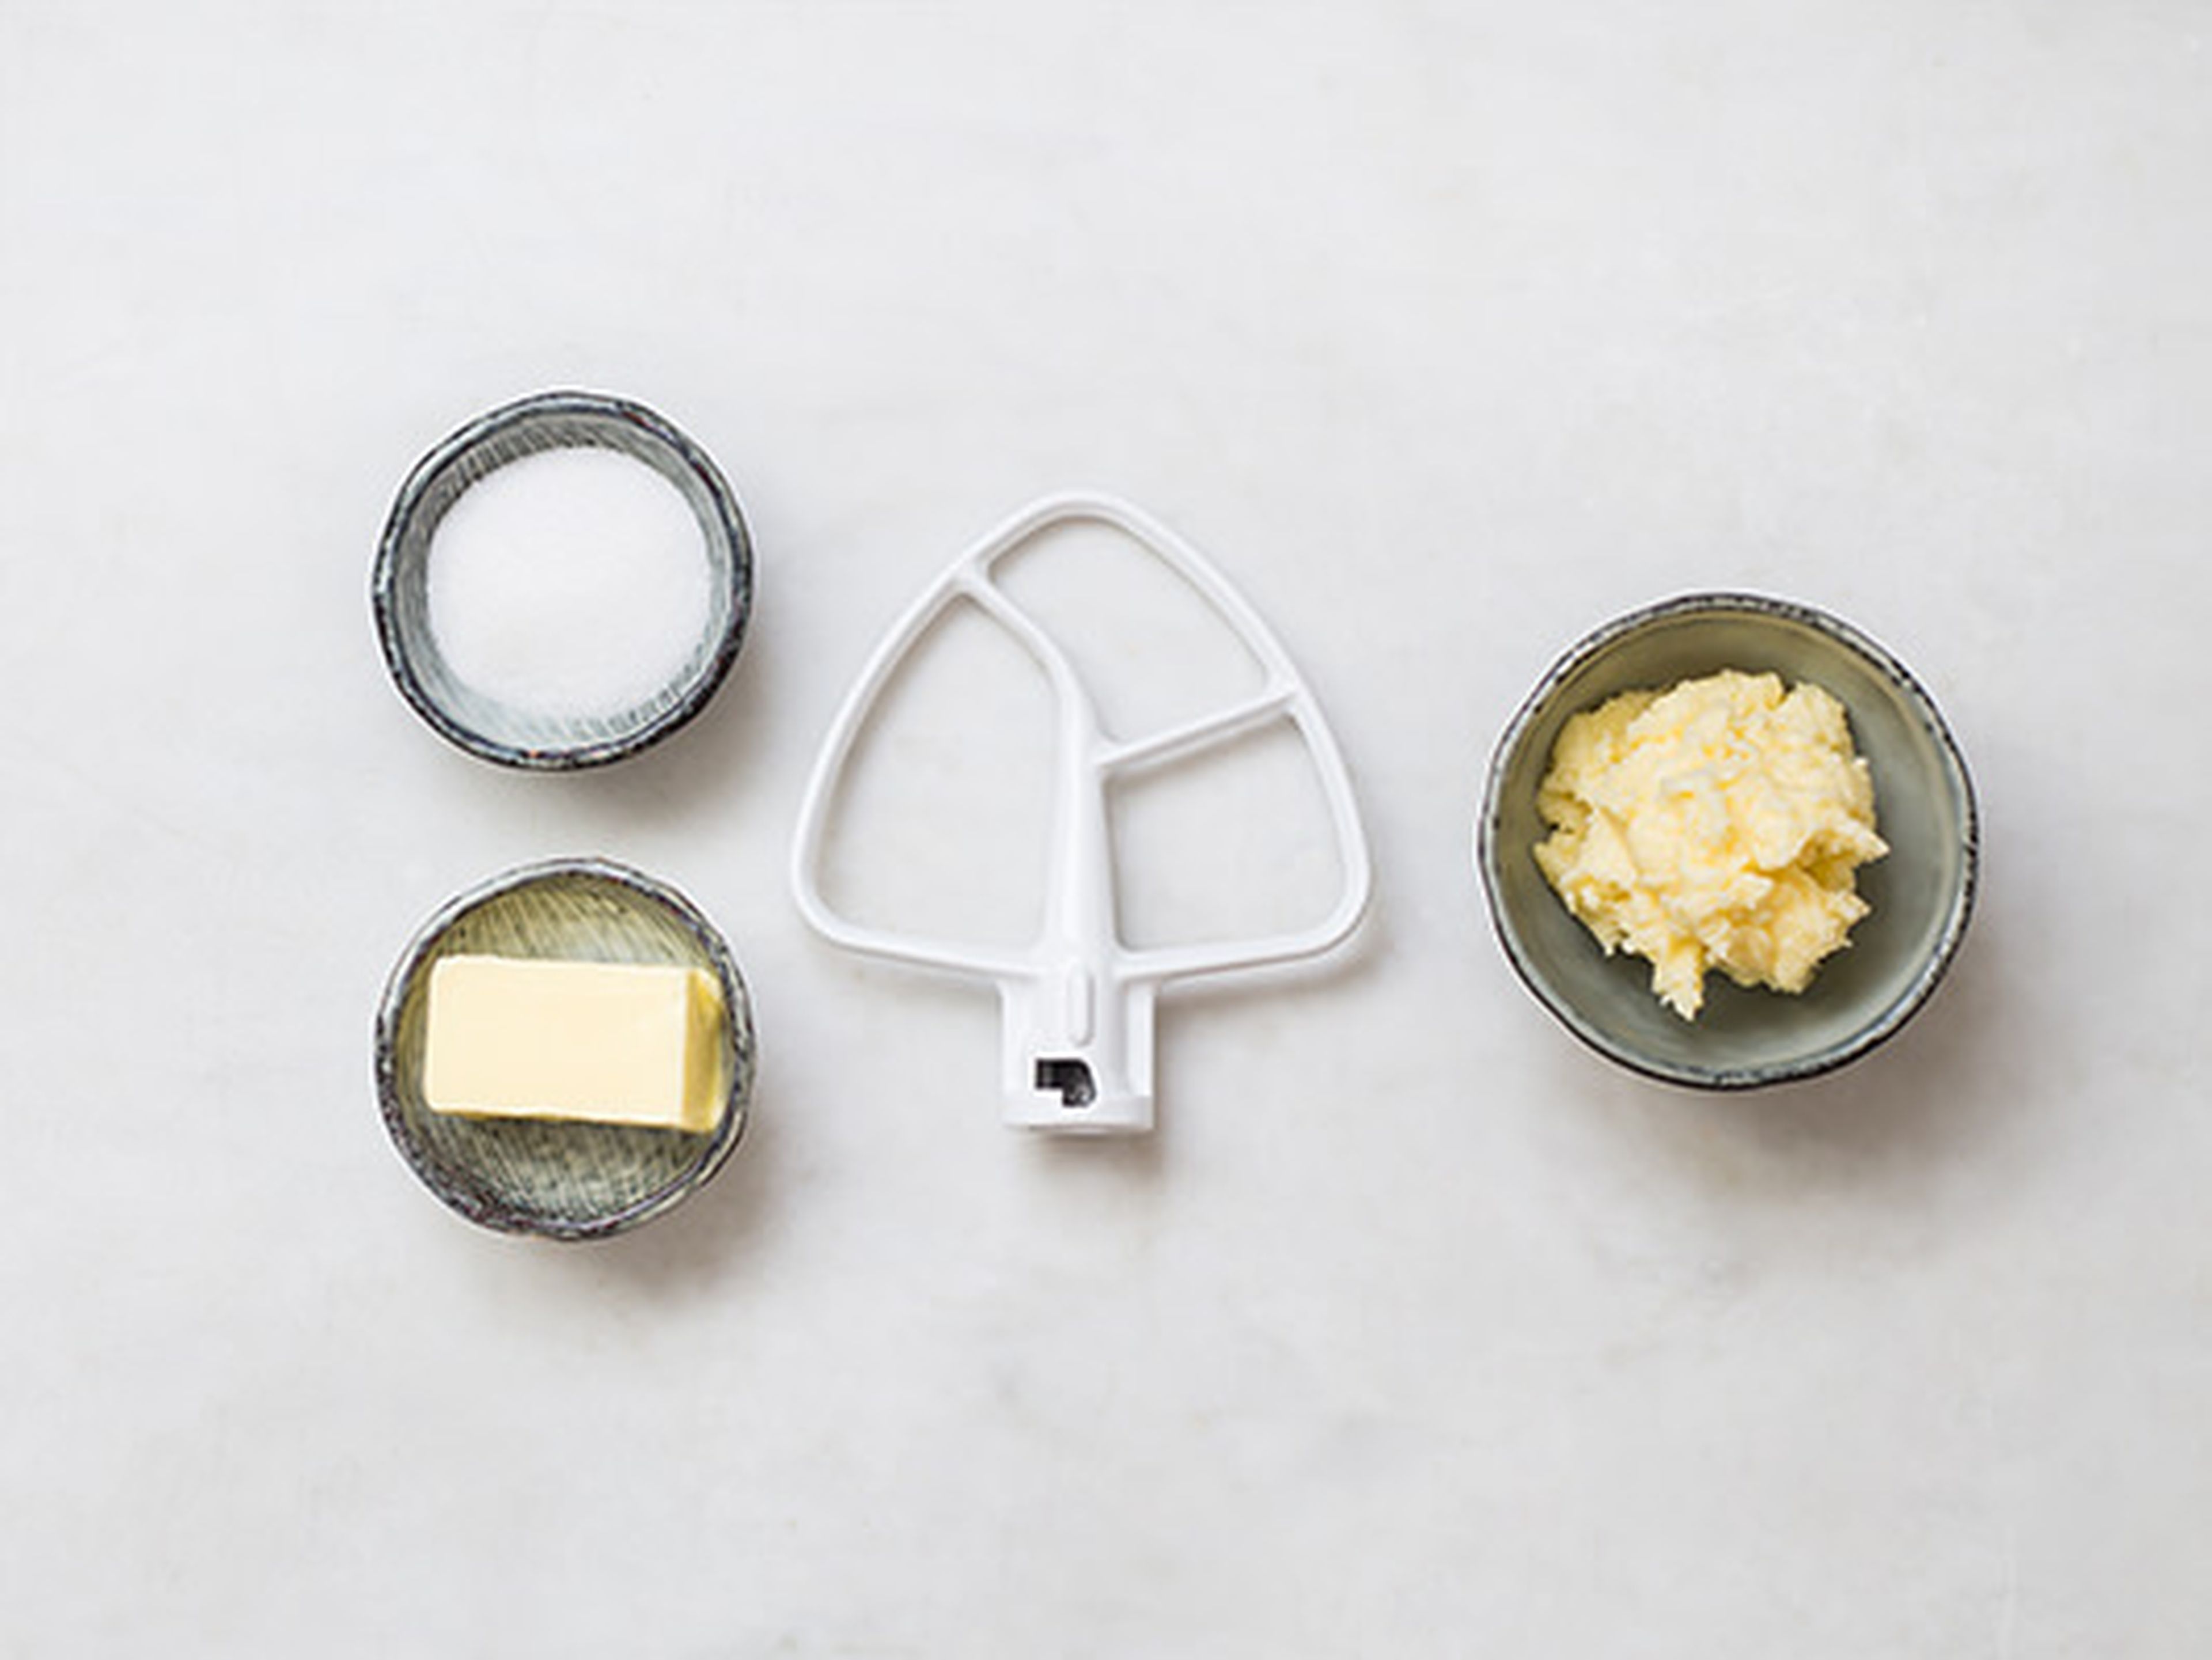 How to cream butter and sugar